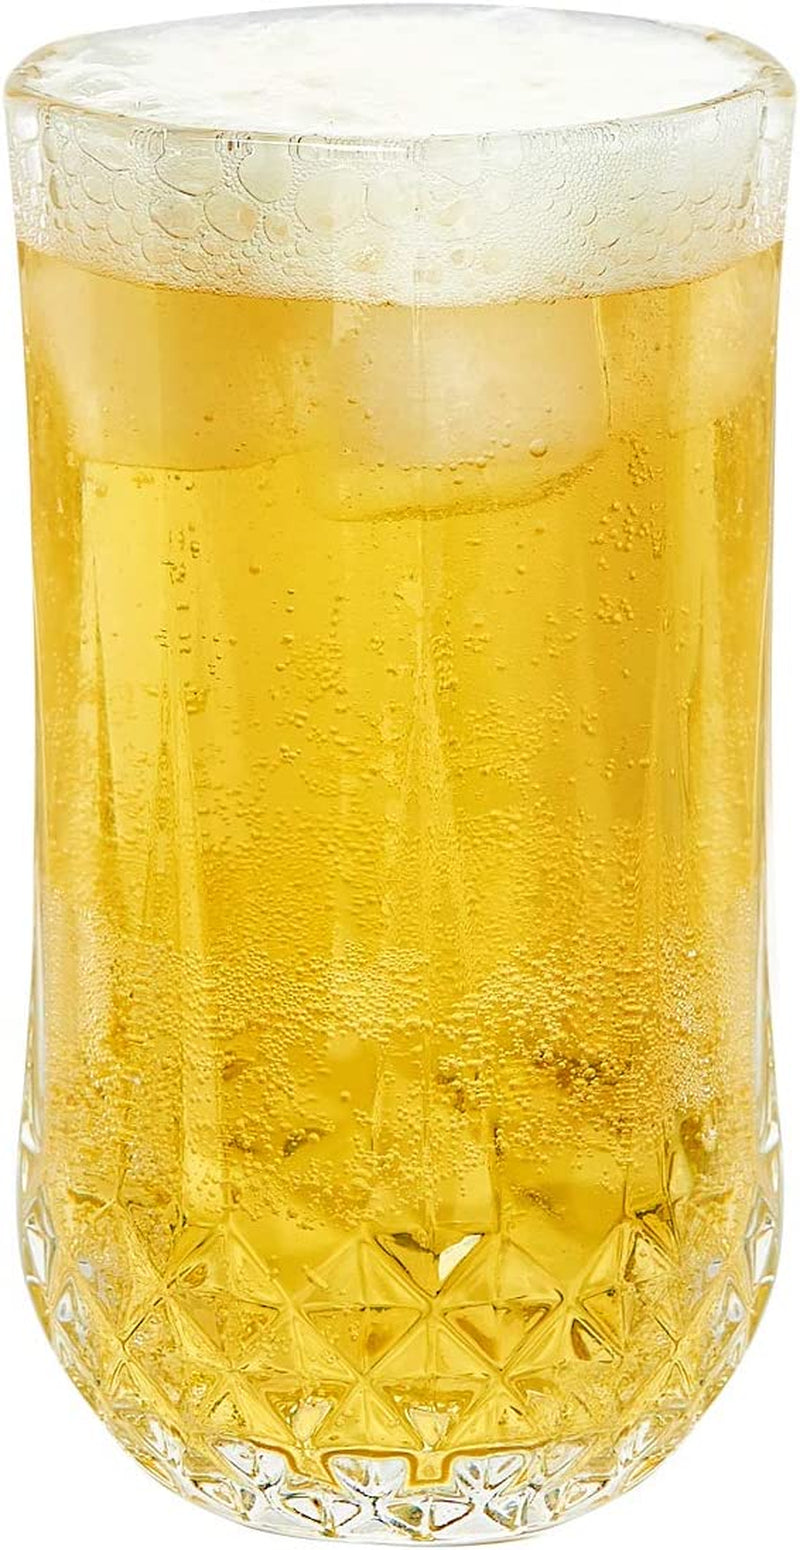 Elegant Highball Glasses Set of 12, Fancy Drinking Glasses 11-Oz, Clear Heavy Base Tall Bar Glass, Crystal Dinner Glasses Drinking for Water, Beer, Juice, Cocktails, Wine, Soda Home & Garden > Kitchen & Dining > Tableware > Drinkware copdrel   